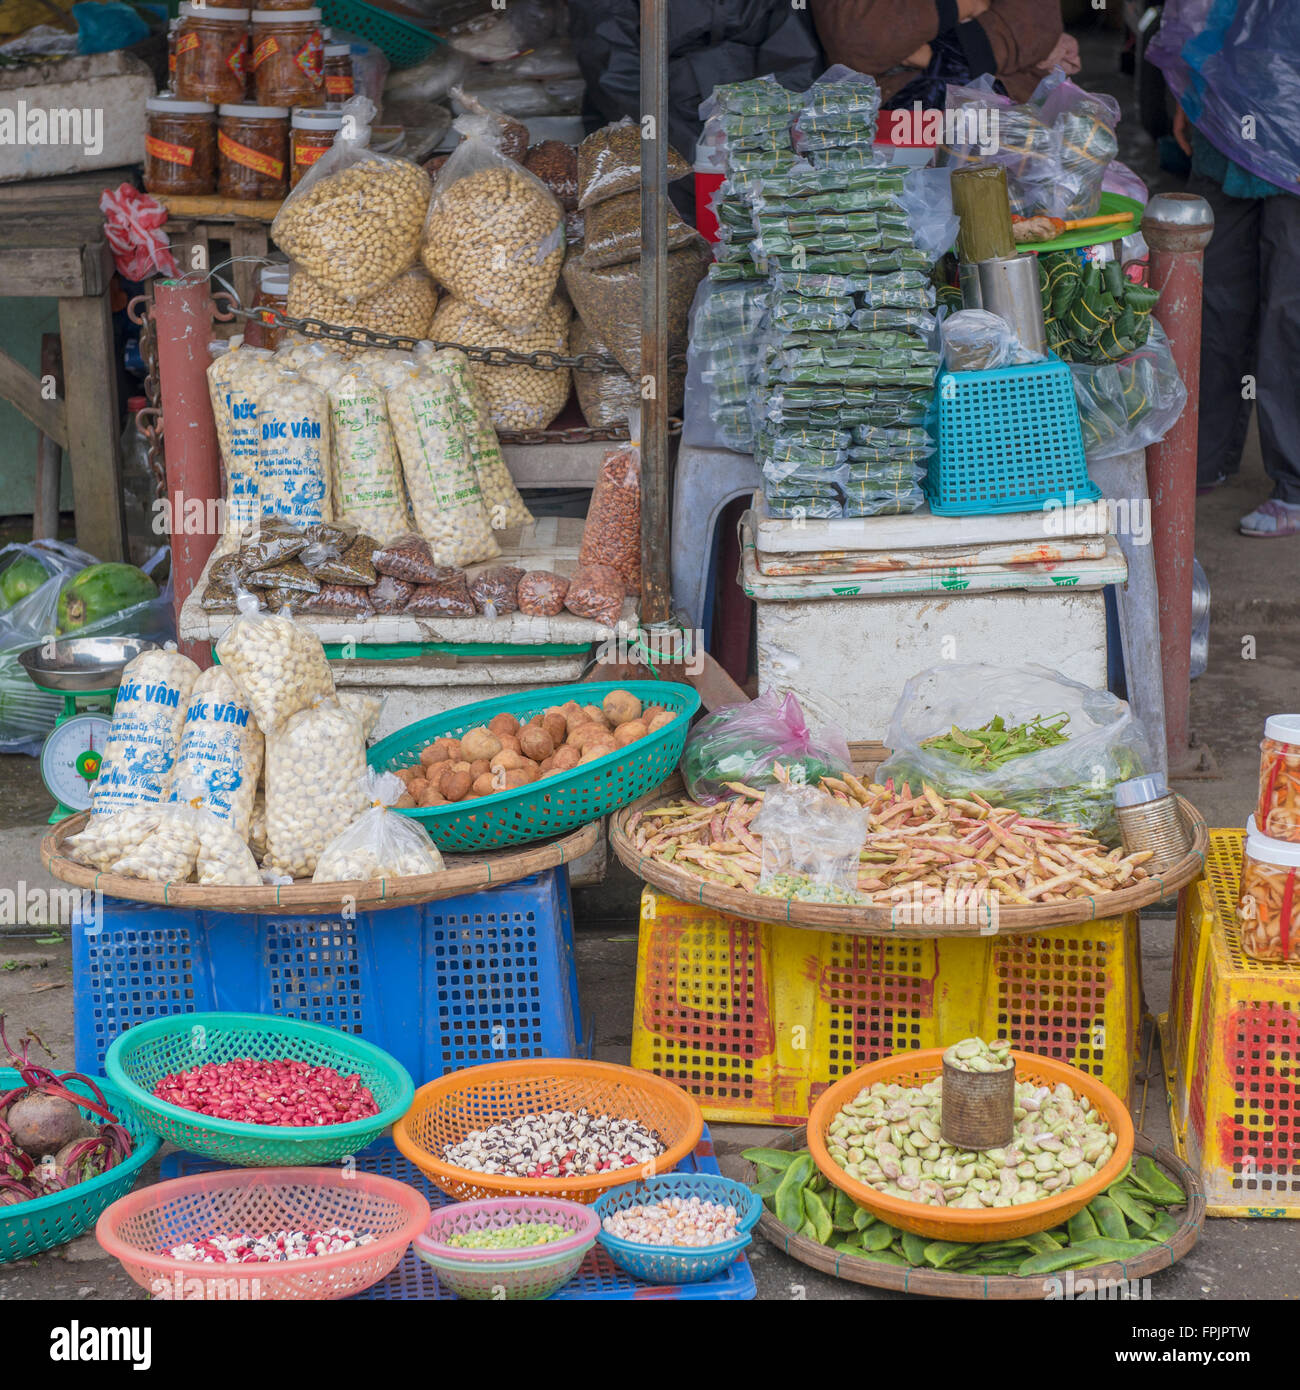 Market pavement vendor selling dried food in a street stall in Hoi An, Vietnam The display includes, pulses and dried foods Stock Photo